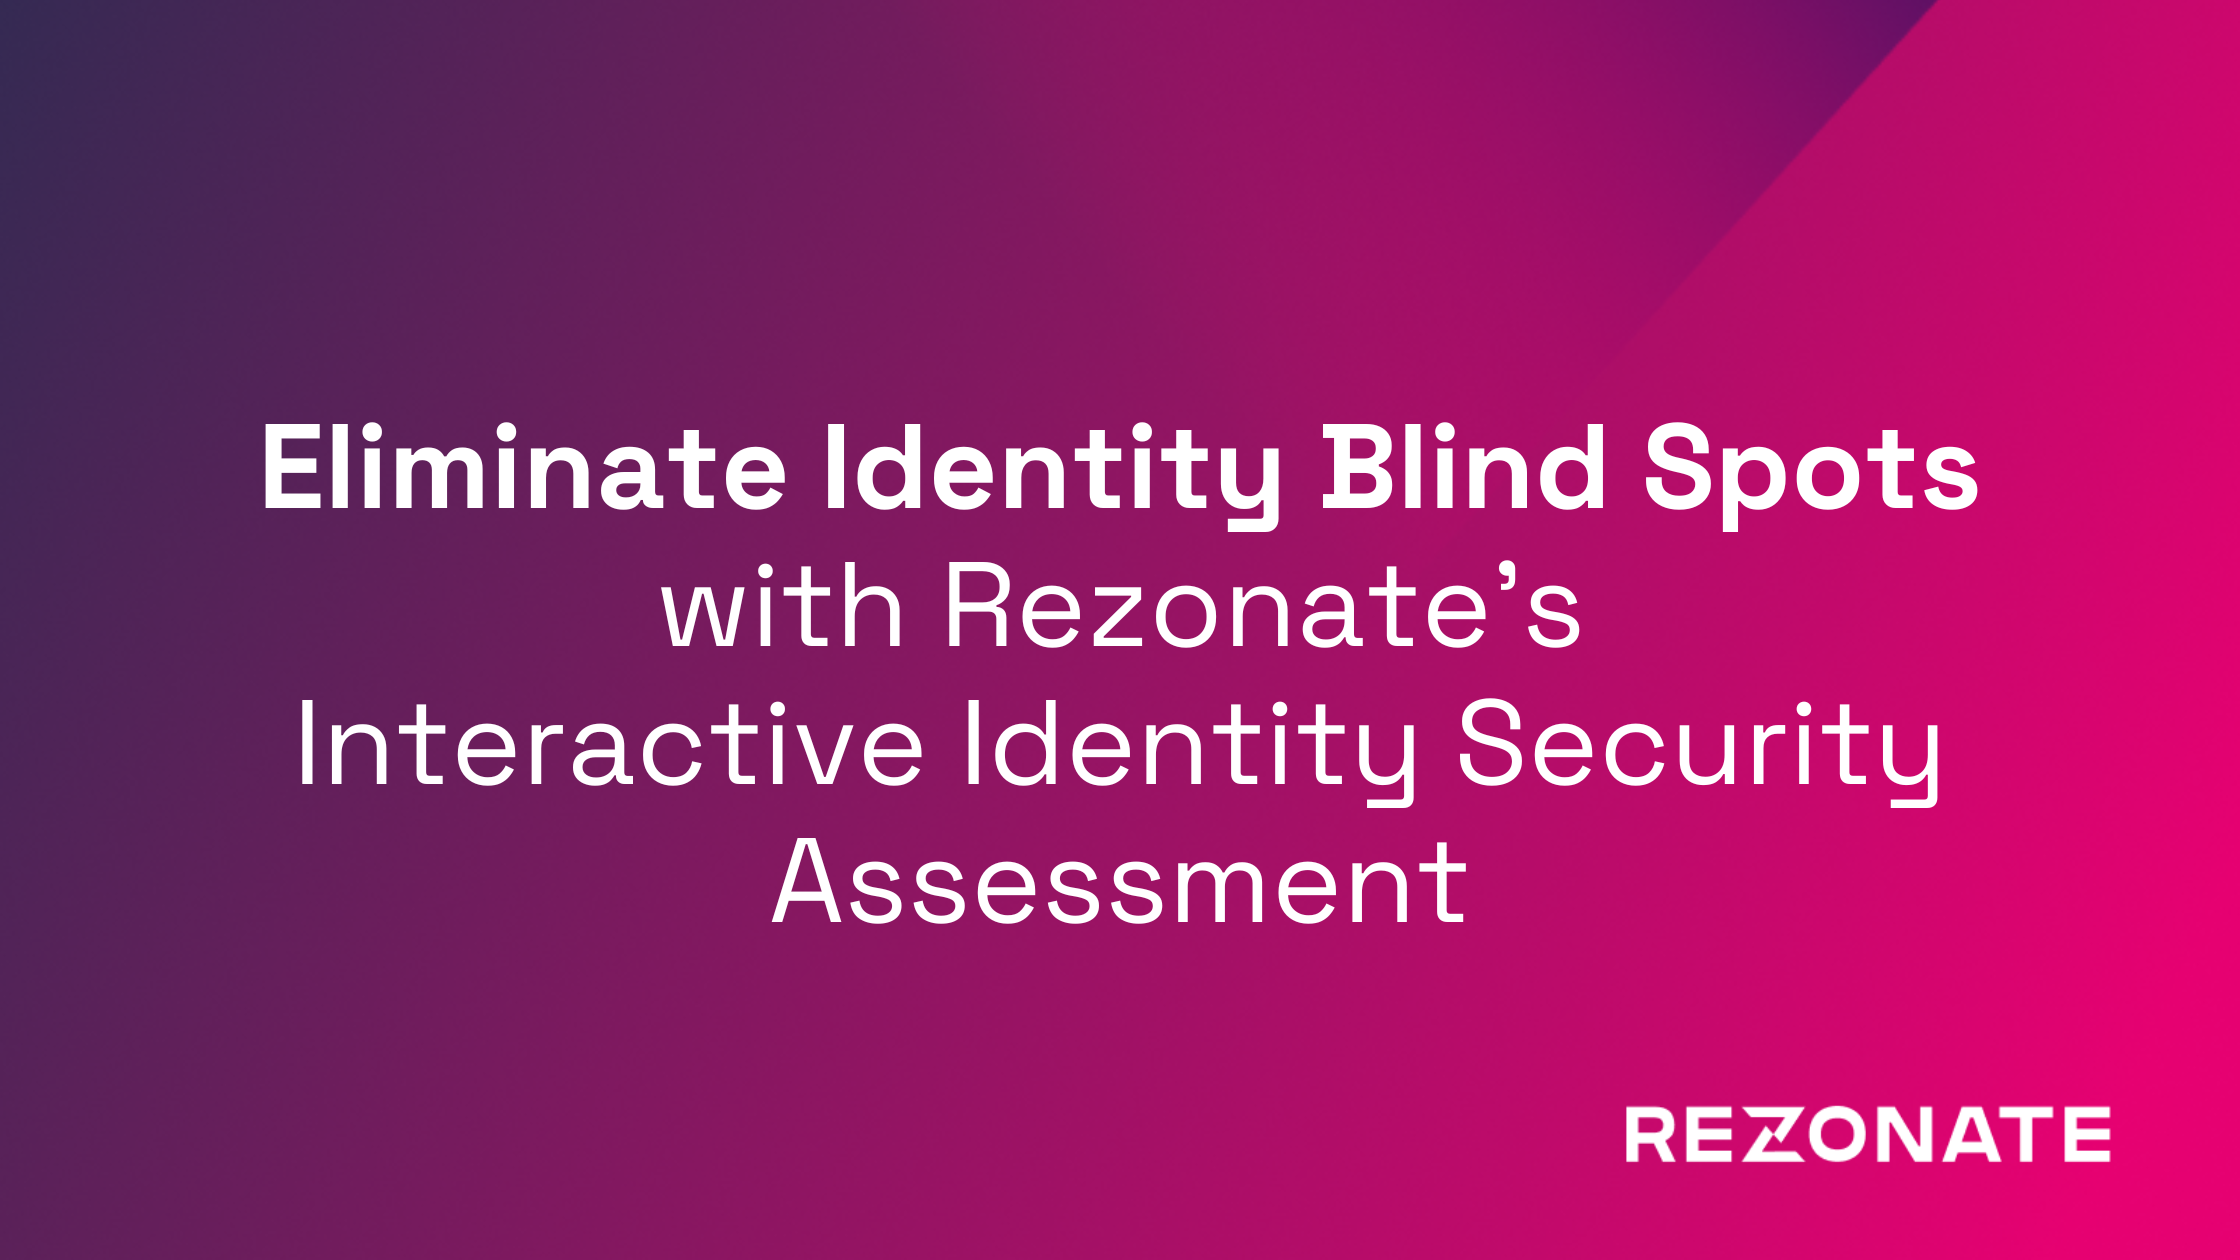 Eliminate Identity Blind Spots with an Identity Security Assessment